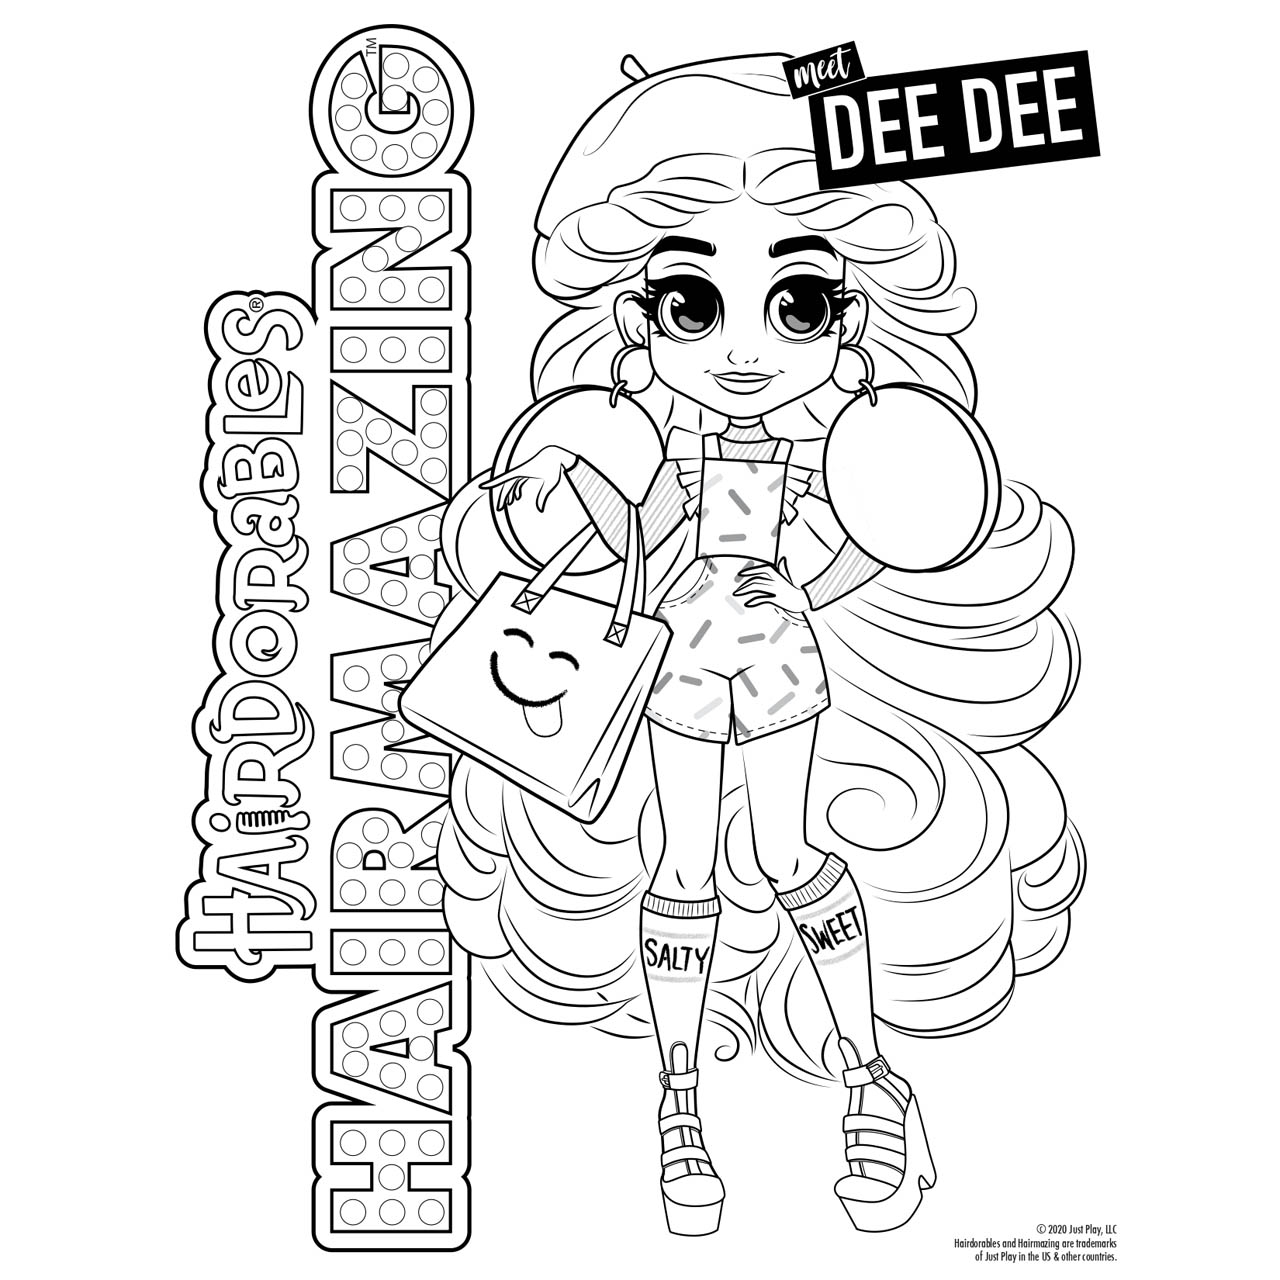 Free Hairdorables Dee Dee Coloring Pages printable